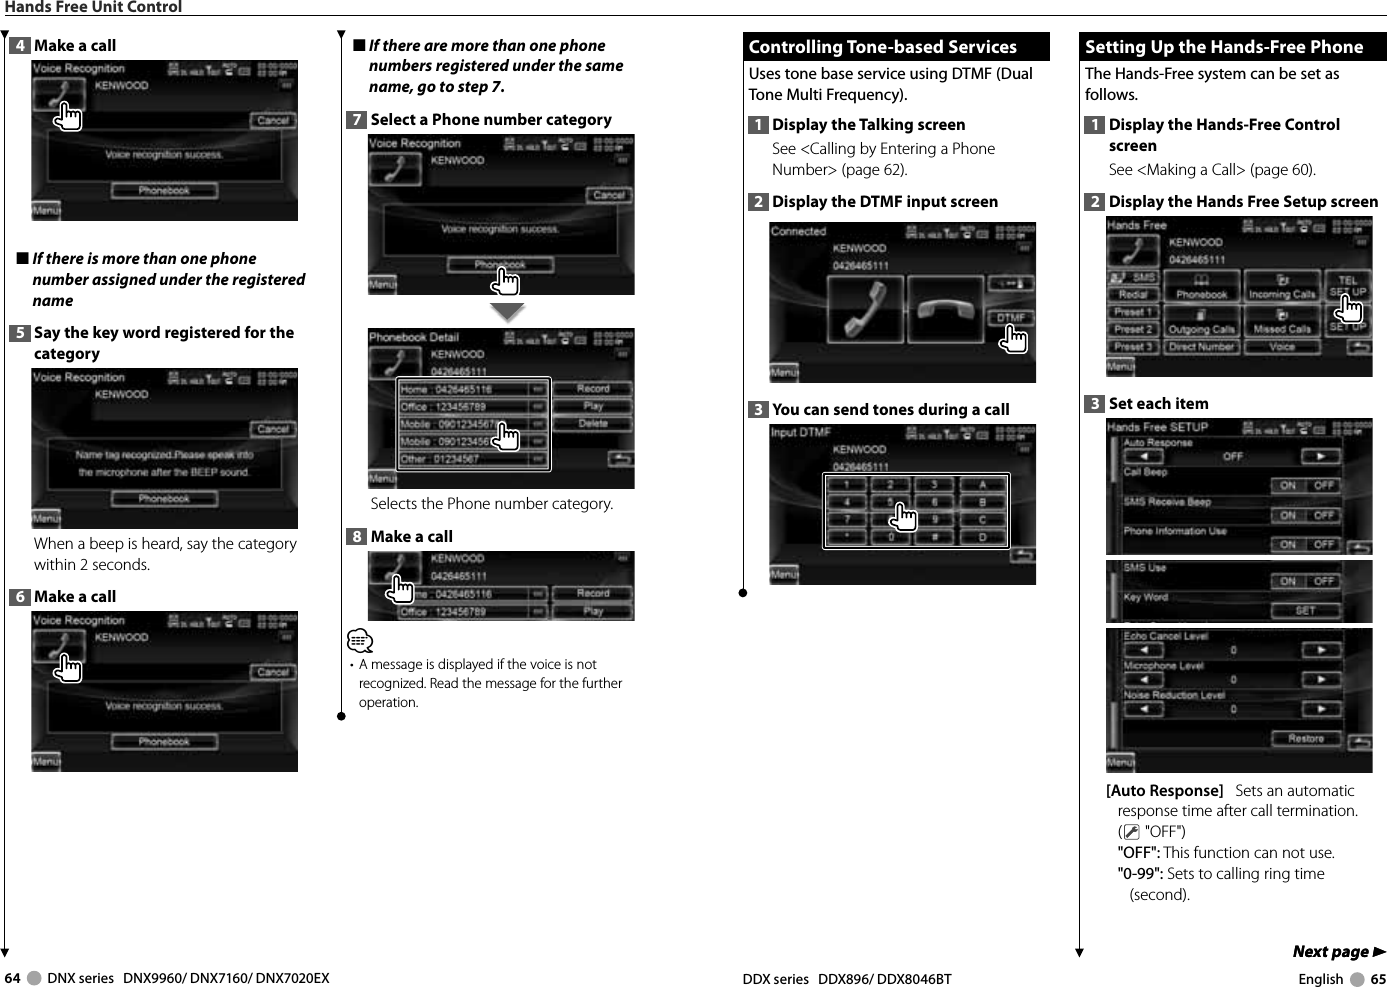 64     DNX series   DNX9960/ DNX7160/ DNX7020EX DDX series   DDX896/ DDX8046BT English     65Next page 3Next page 3 Controlling Tone-based Services Controlling  Tone-based  ServicesUses tone base service using DTMF (Dual Tone Multi Frequency). 1  Display the Talking screenSee &lt;Calling by Entering a Phone Number&gt; (page 62).2  Display the DTMF input screen3  You can send tones during a call Setting Up the Hands-Free Phone Setting Up the Hands-Free PhoneThe Hands-Free system can be set as follows.1  Display the Hands-Free Control screenSee &lt;Making a Call&gt; (page 60). 2  Display the Hands Free Setup screen3  Set each item[Auto Response]   Sets an automatic response time after call termination. ( &quot;OFF&quot;)&quot;OFF&quot;: This function can not use.&quot;0-99&quot;: Sets to calling ring time (second).Hands Free Unit Control4  Make a call■  If there is more than one phone number assigned under the registered name5  Say the key word registered for the categoryWhen a beep is heard, say the category within 2 seconds.6  Make a call■  If there are more than one phone numbers registered under the same name, go to step 7.7  Select a Phone number categorySelects the Phone number category. 8  Make a call⁄•  A message is displayed if the voice is not recognized. Read the message for the further operation. 